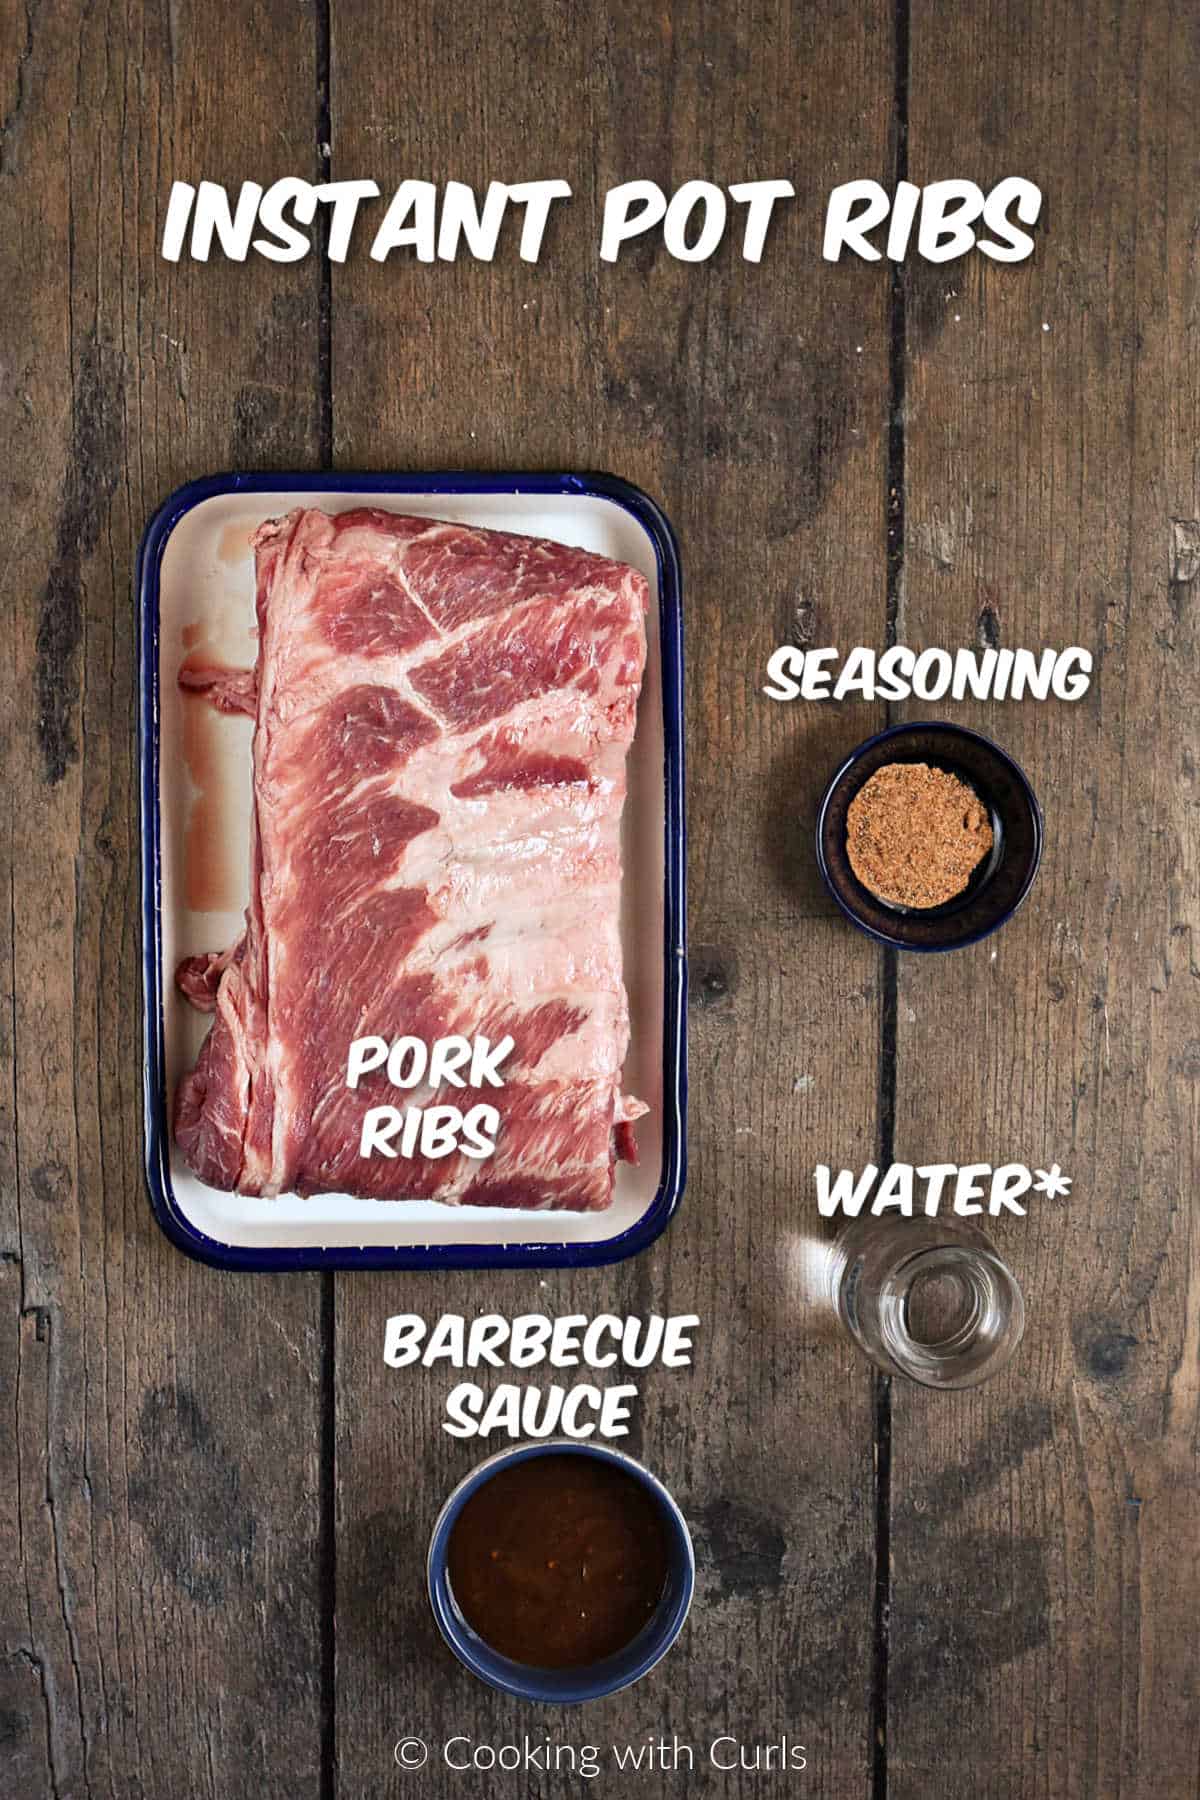 Ingredients needed to make instant pot ribs.